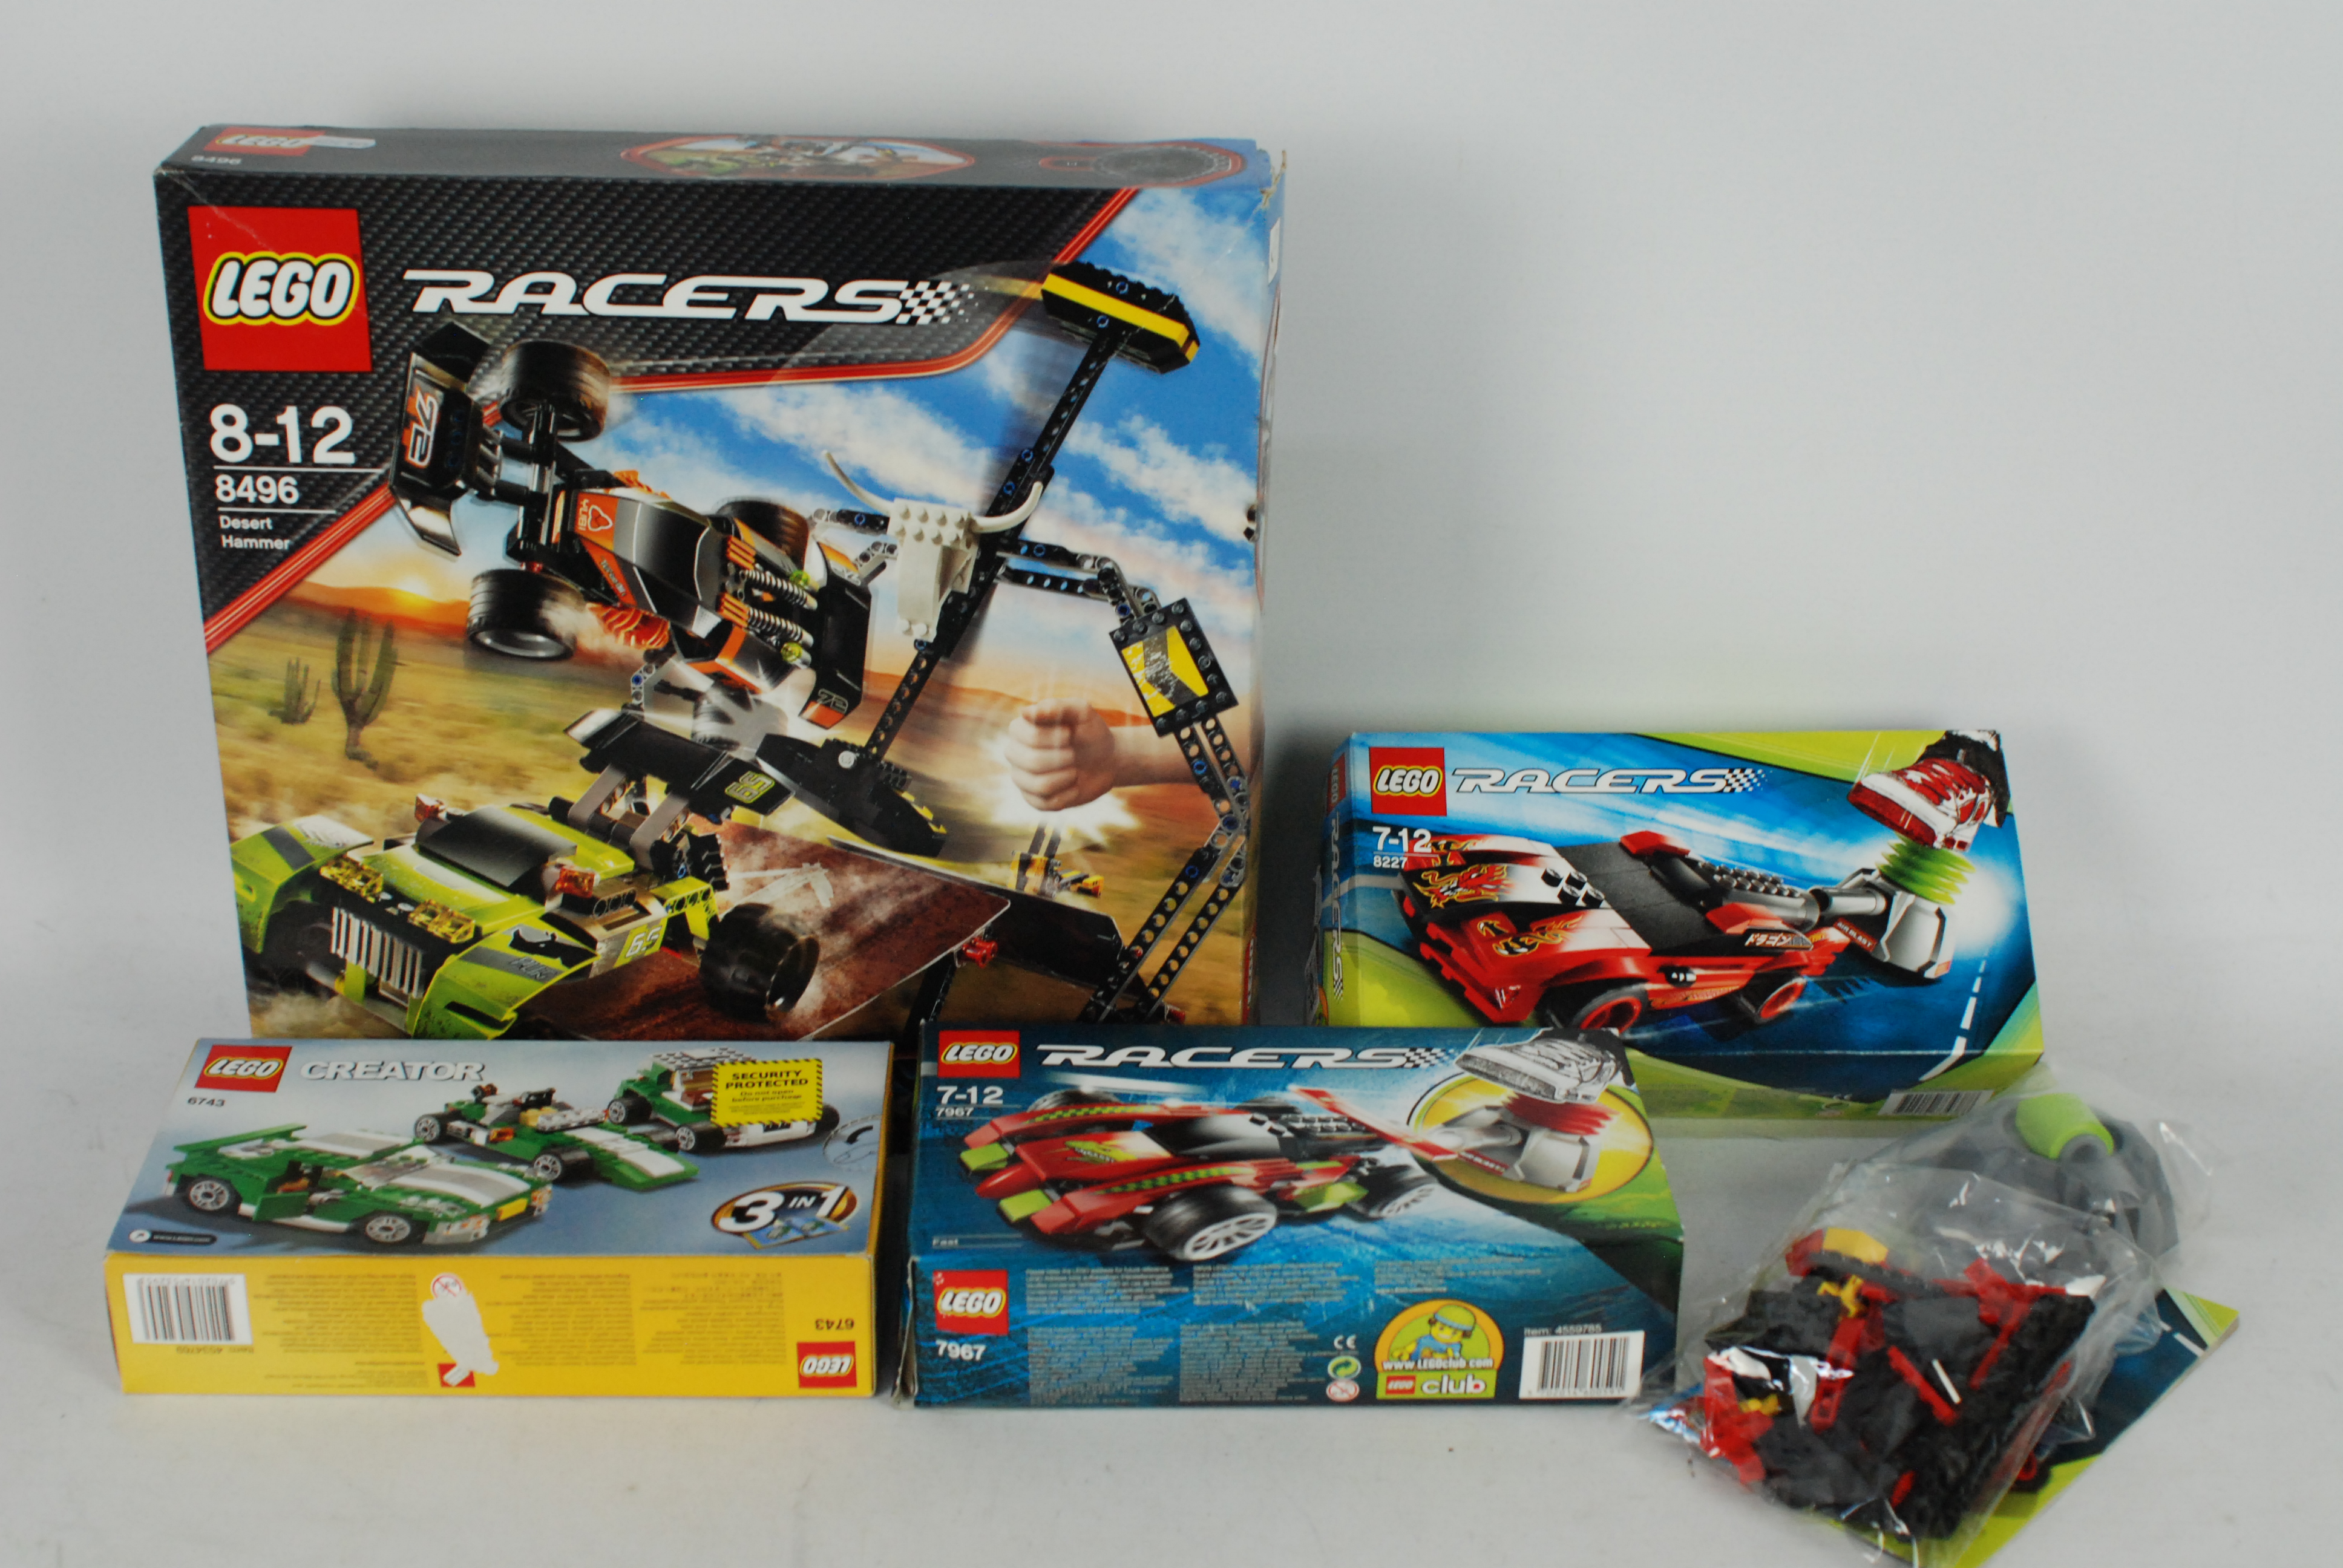 Lego - Four boxed Lego sets from mainly the 'Racers' ranges.